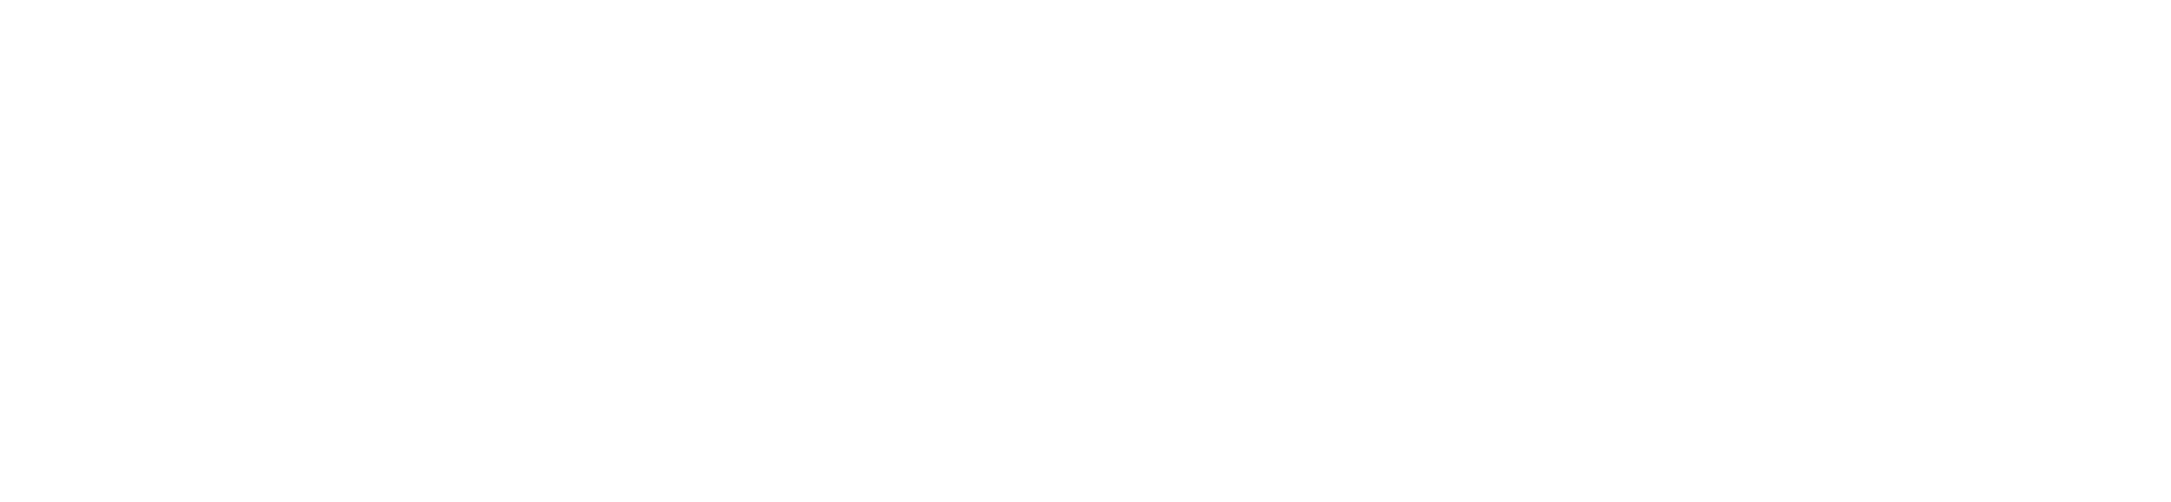 OFFICIAL-TIMS-Software-Service-Support-White-Open-Sans-1